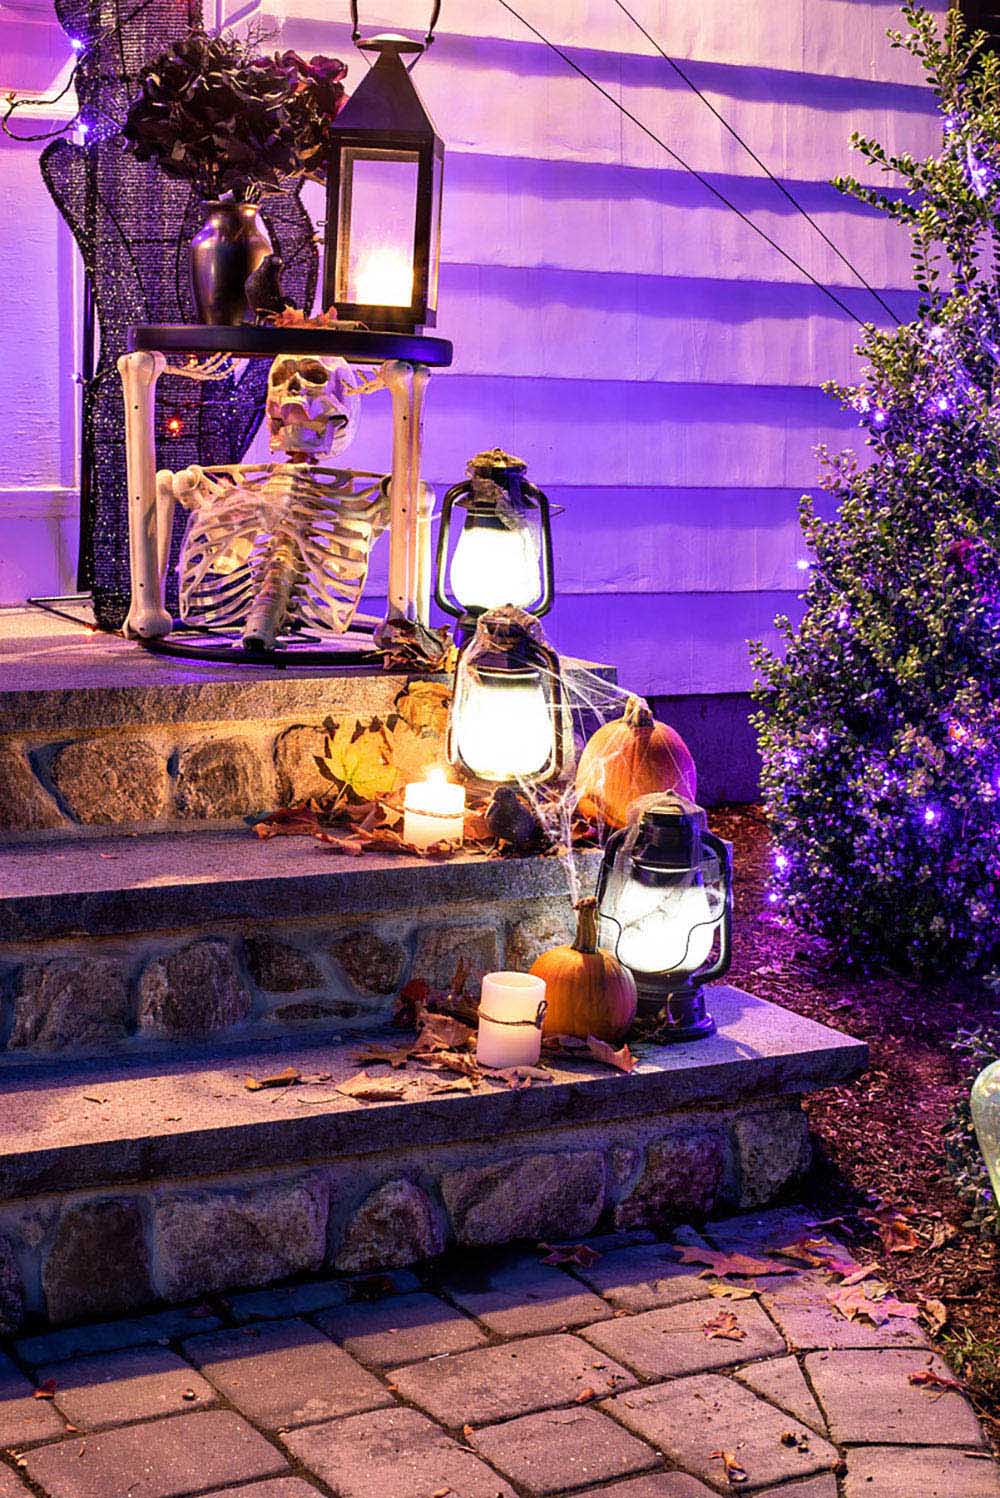 A night view of the lanterns and pumpkins on the front steps